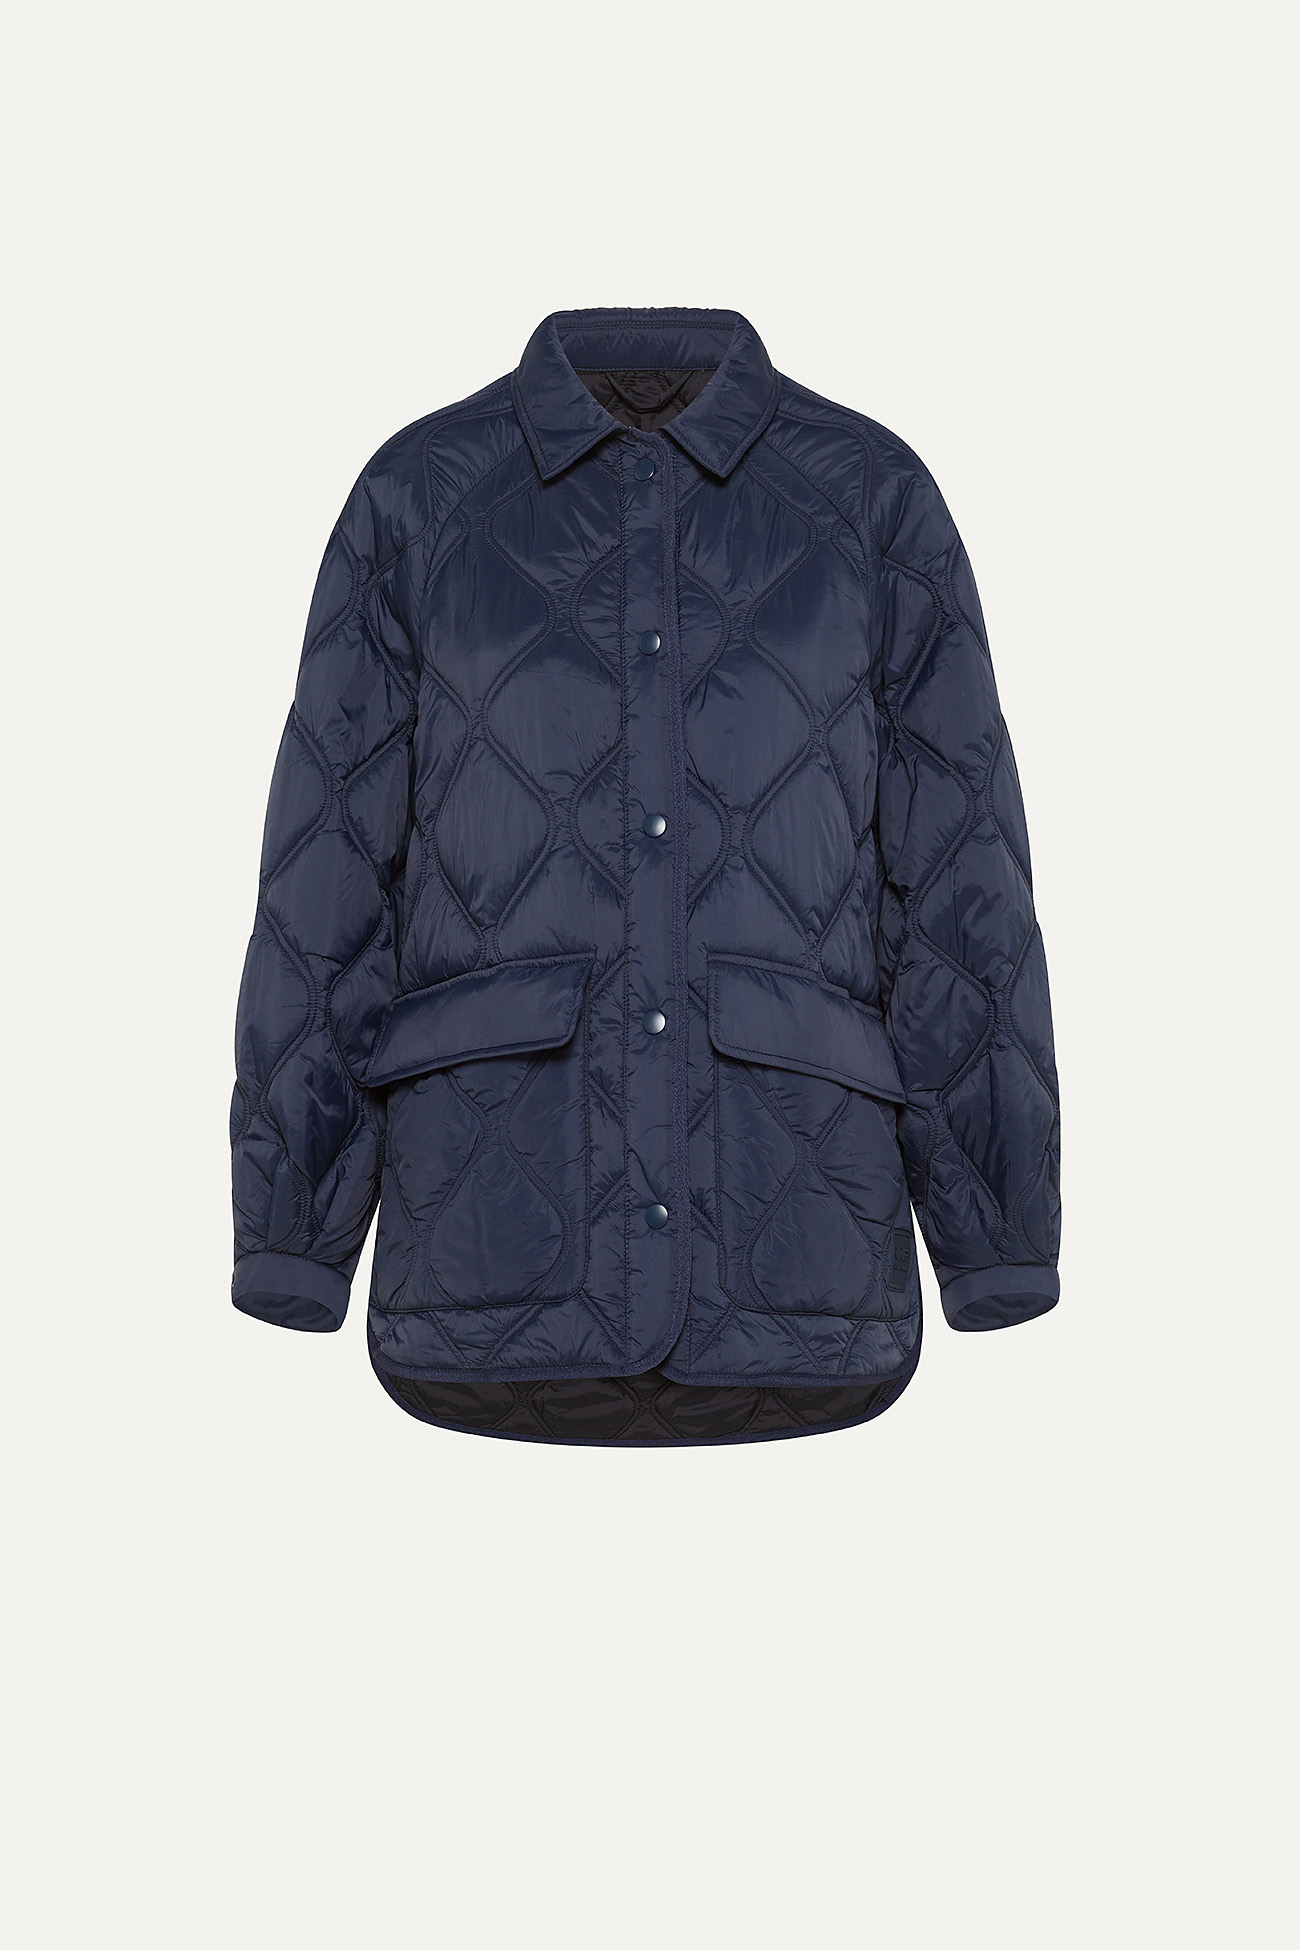 OVERSIZE JACKET IN QUILTED LIGHT NYLON 9222 - MIDNIGHT BLUE - OOF WEAR